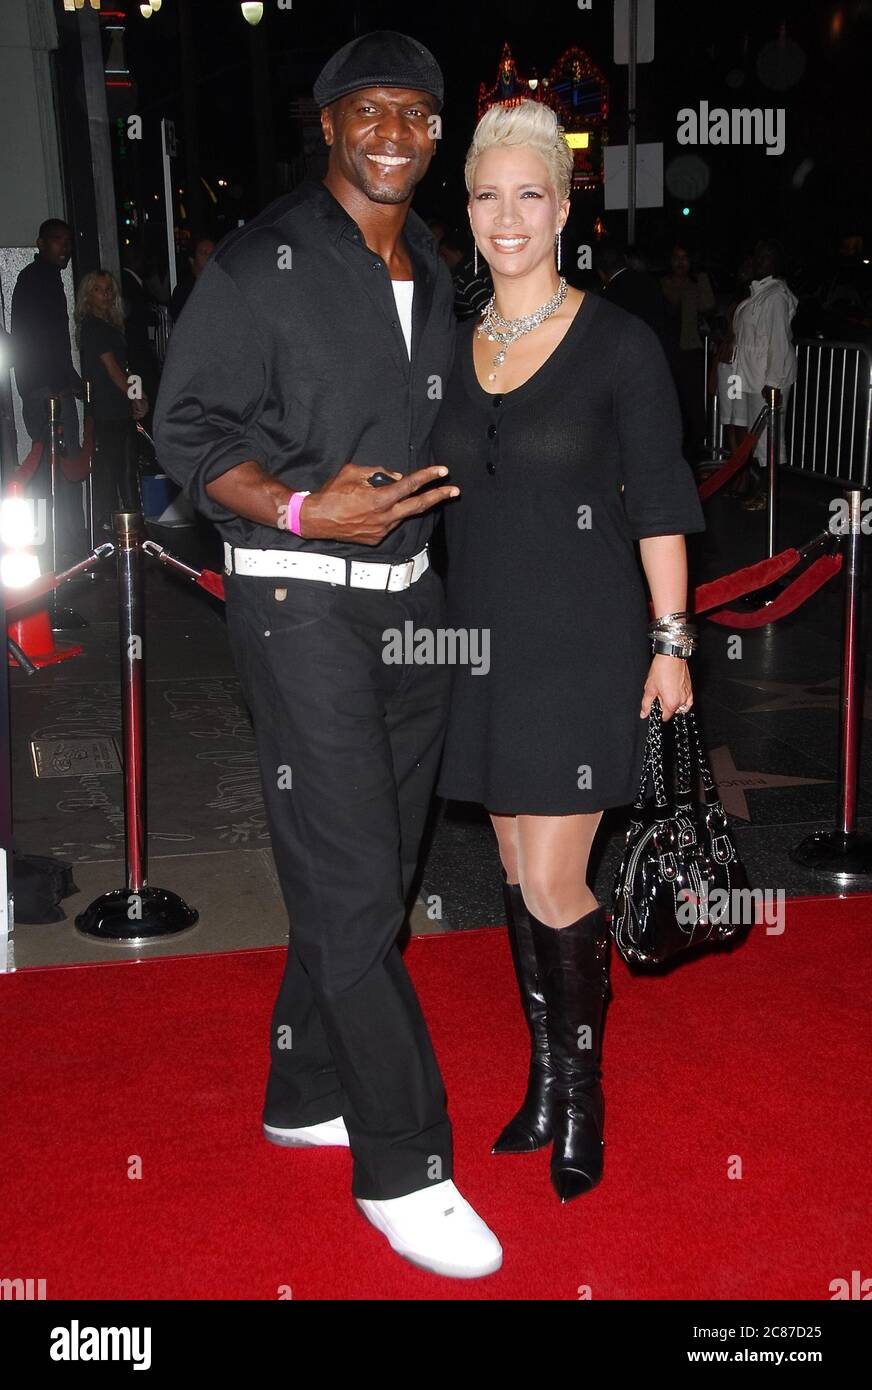 Terry Crews and Wife Rebecca at the Premiere of 'Somebody Help Me' held at the Grauman's Chinese Theater in Hollywood, CA. The event took place on Thursday, October25, 2007. Photo by: SBM / PictureLux- File Reference # 34006-9016SBMPLX Stock Photo